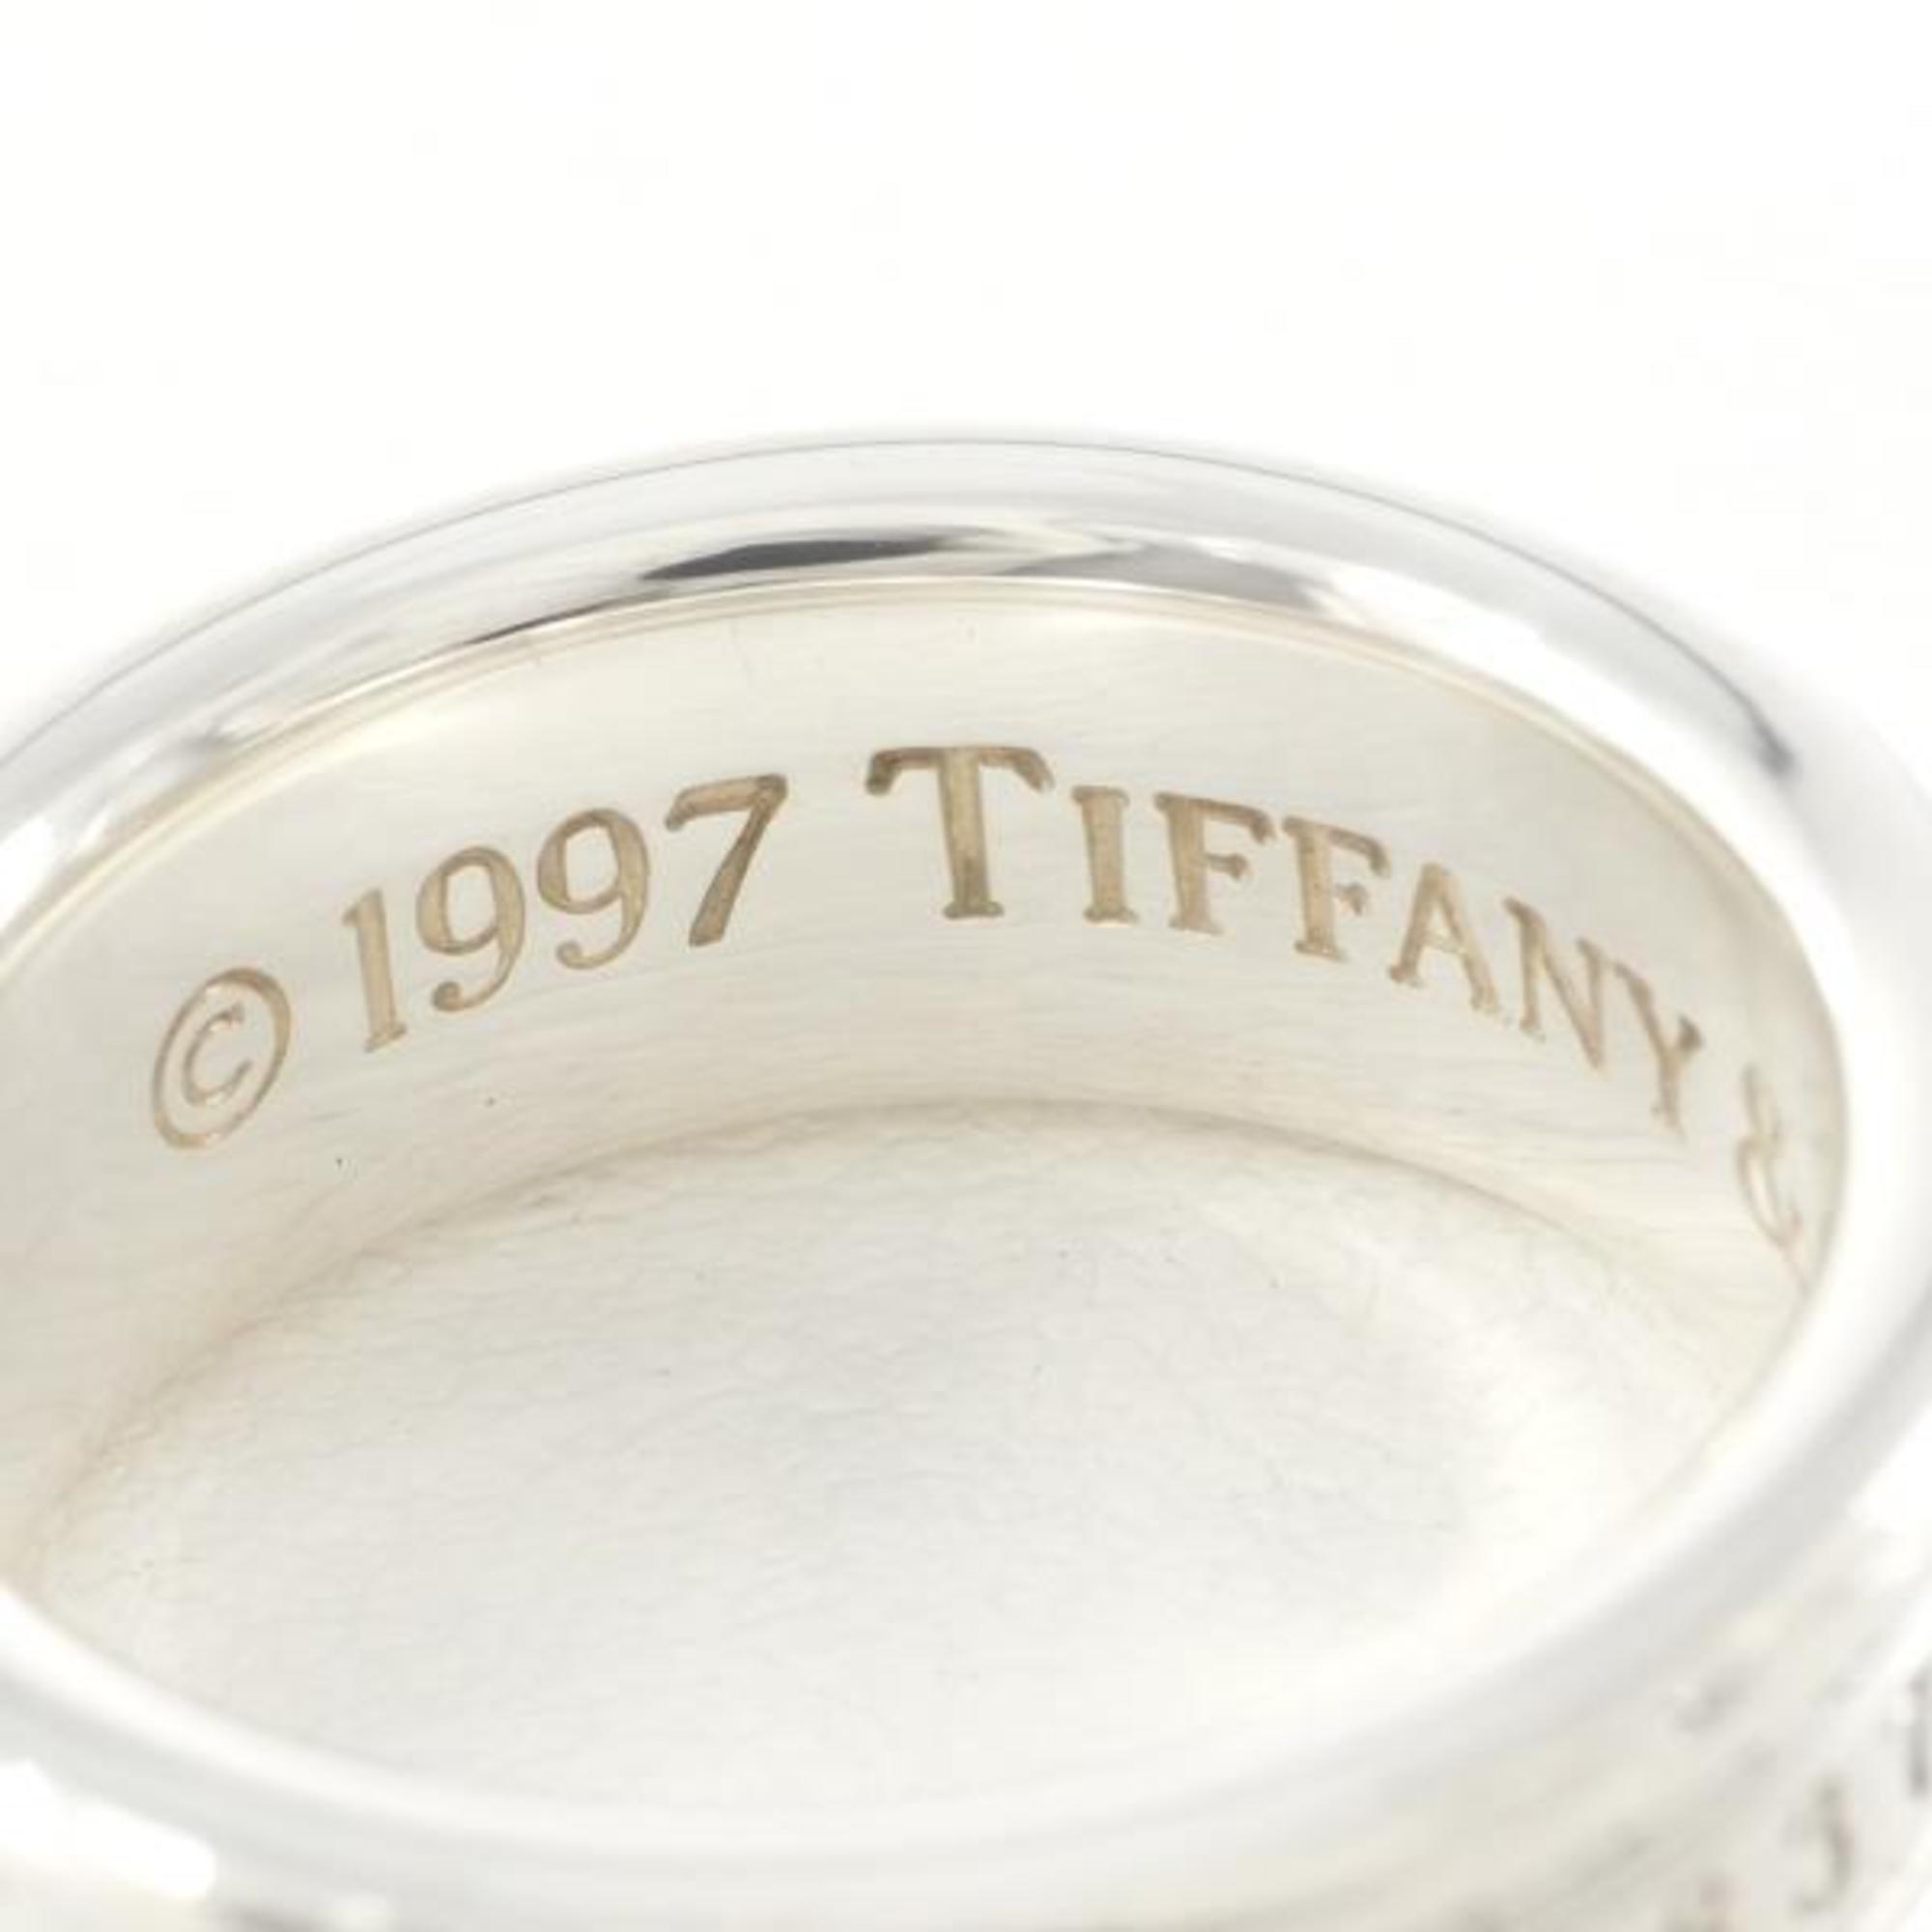 Tiffany 1837 Silver Ring Total weight approx. 7.0g